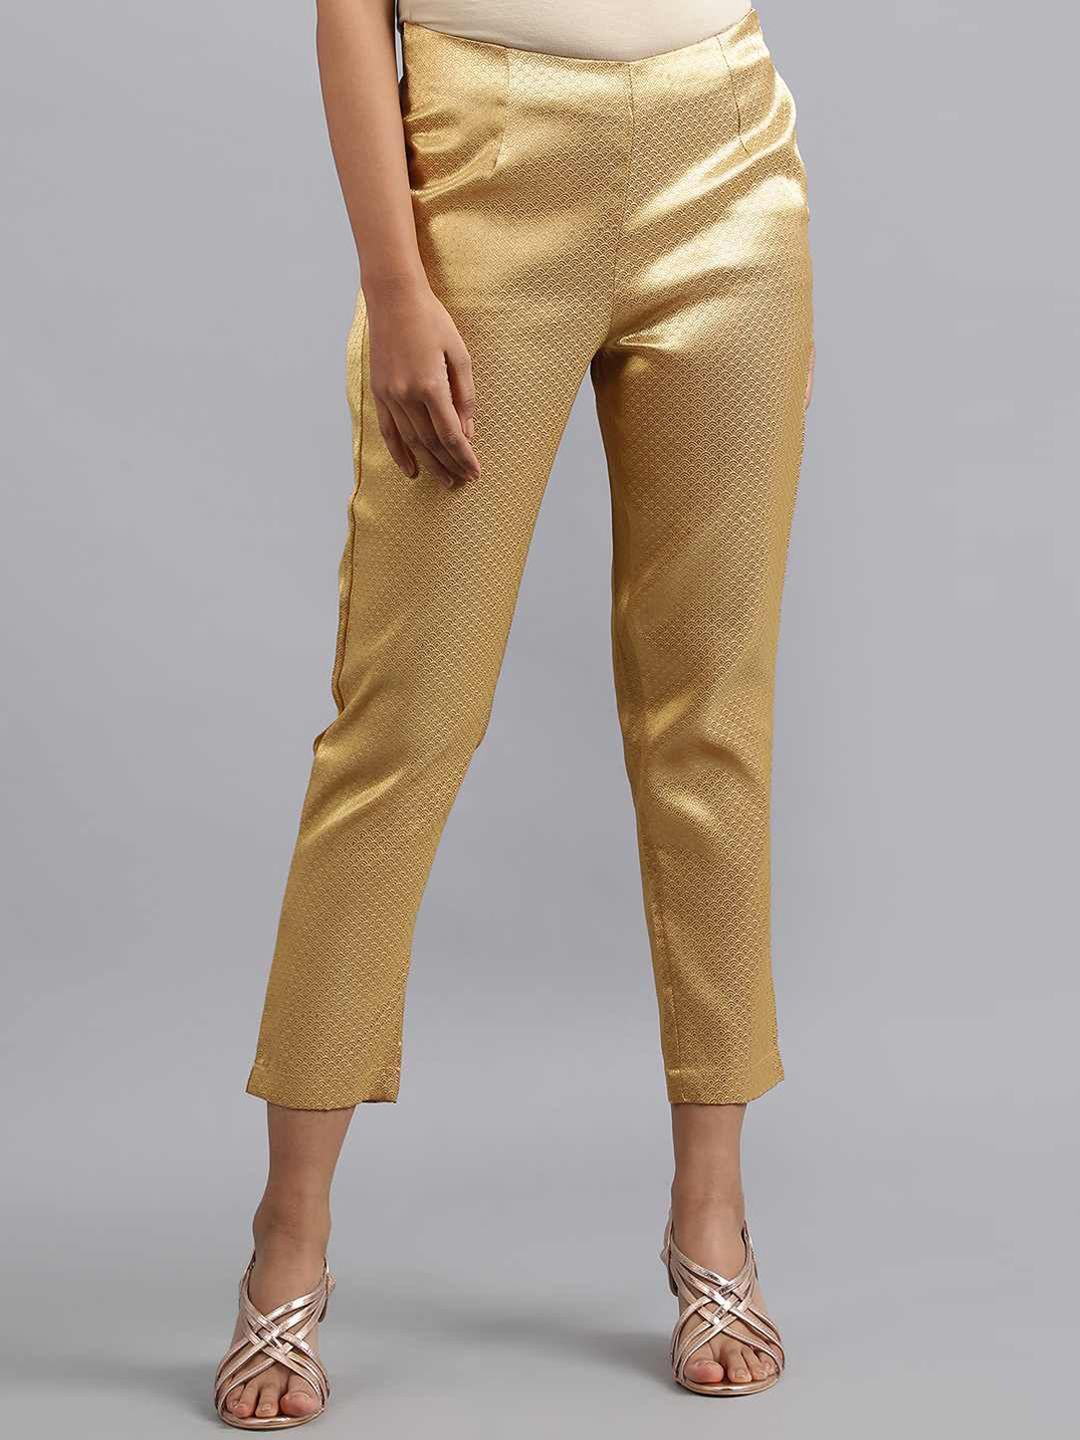 w women gold-toned printed slim fit pleated culottes trousers